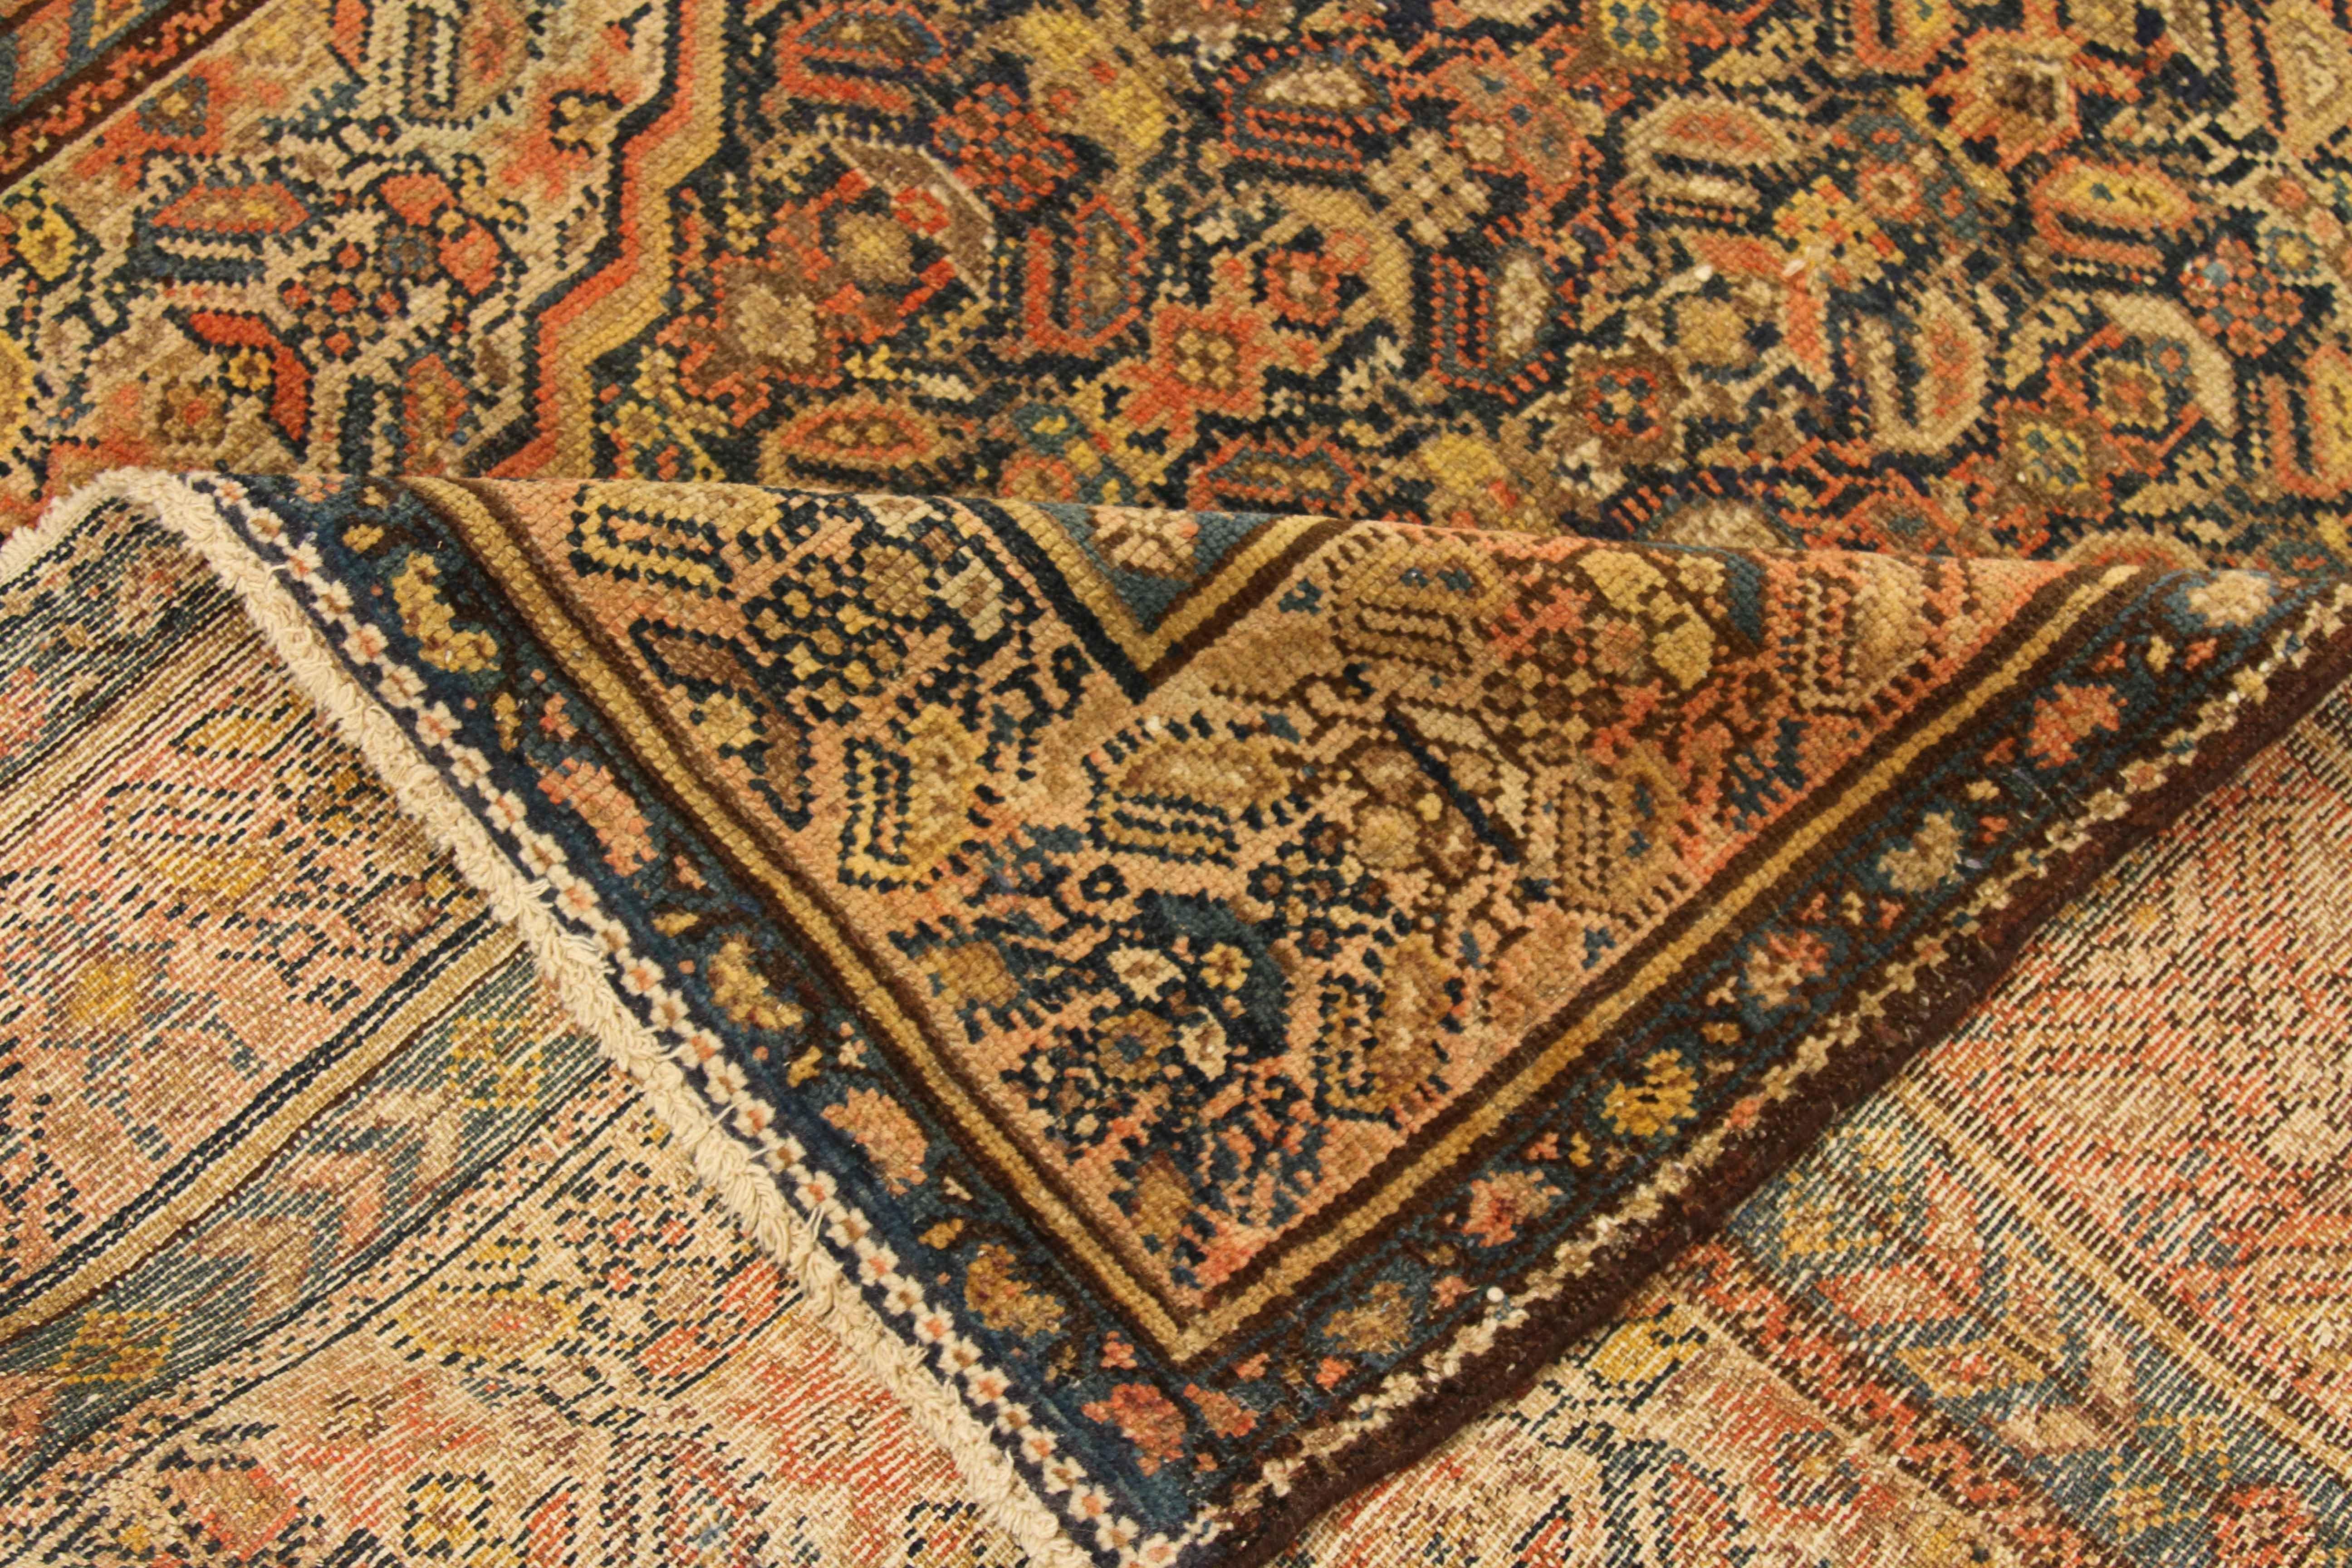 Antique Persian rug handwoven from the finest sheep’s wool and colored with all-natural vegetable dyes that are safe for humans and pets. It’s a traditional Malayer design featuring ‘Boteh’ details in red, yellow, navy and brown. It’s a beautiful